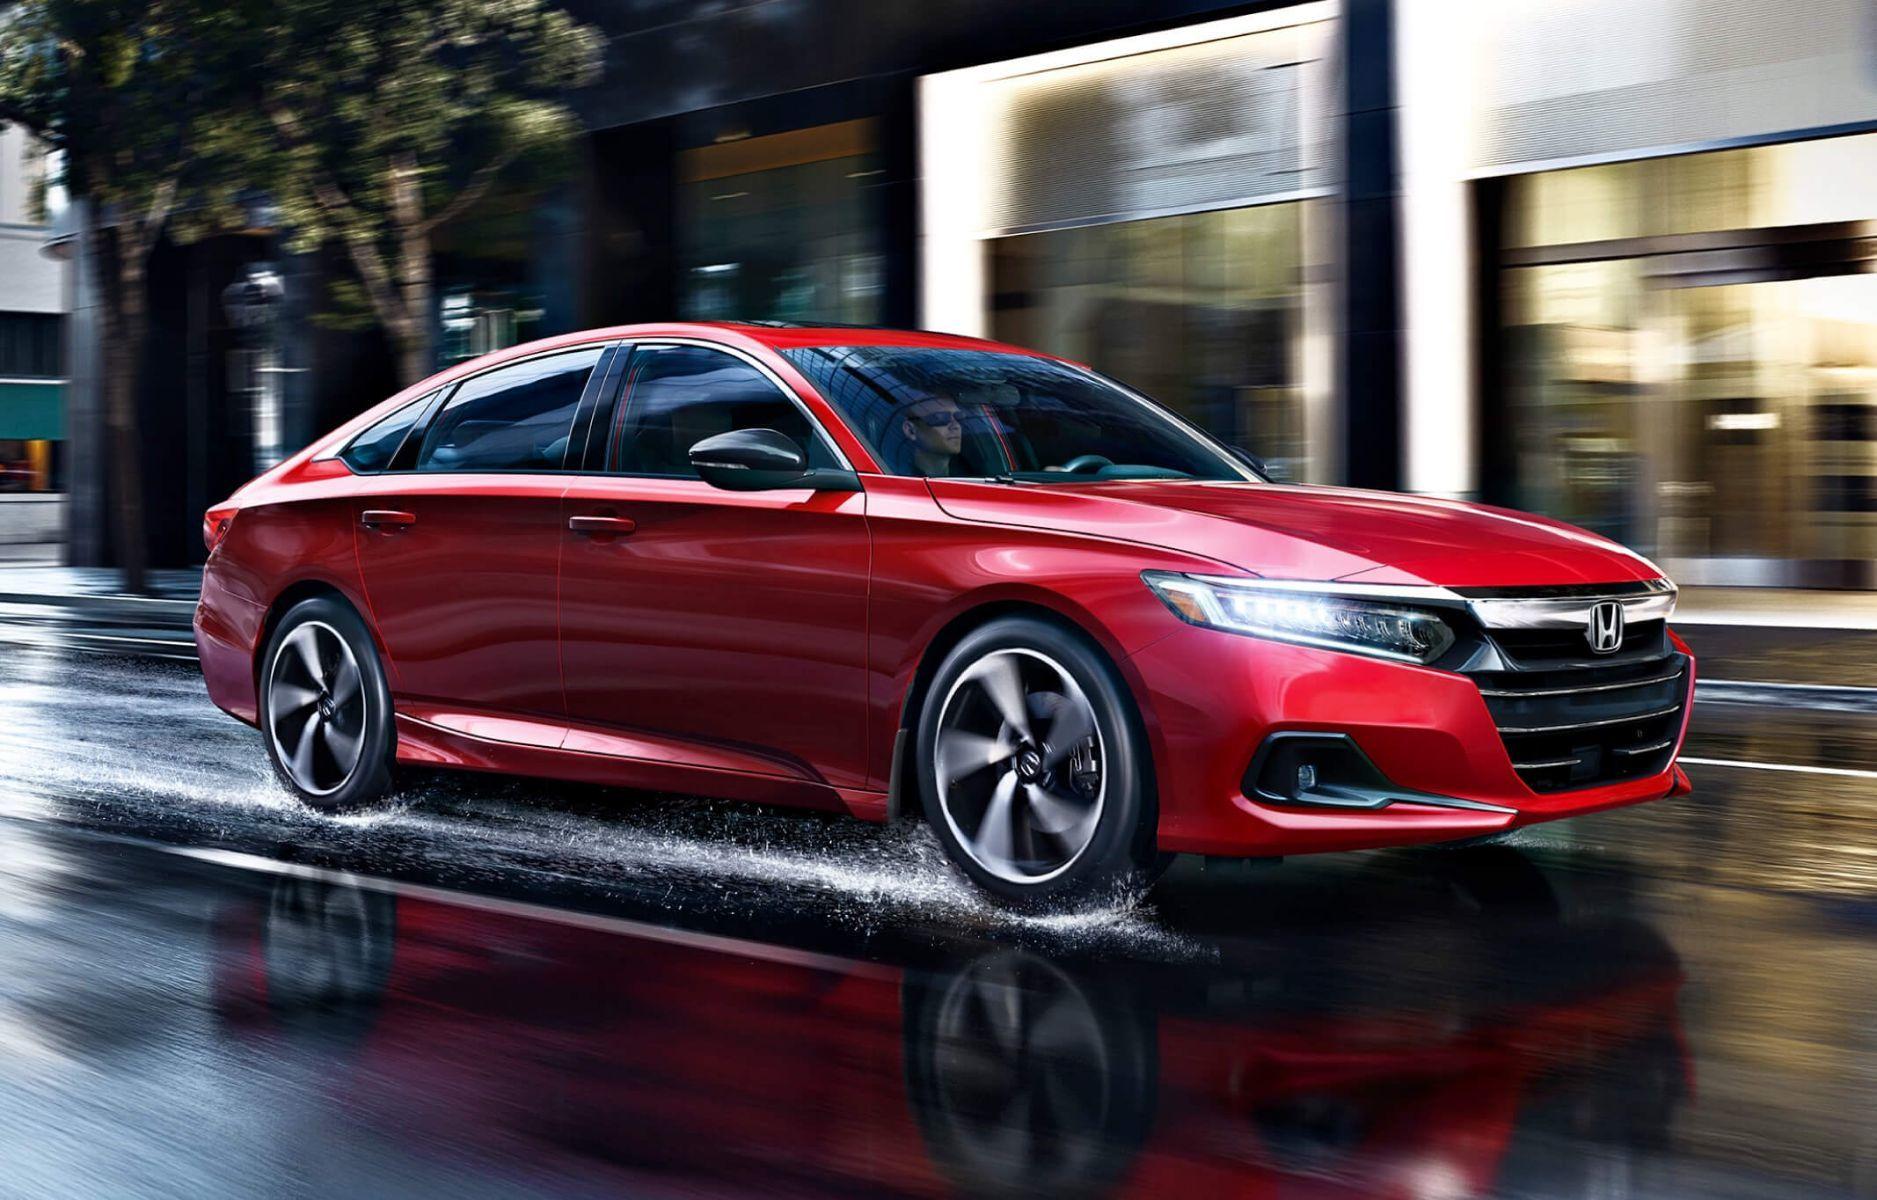 What Is The Difference Between The Honda Accord Sport And EX-L?